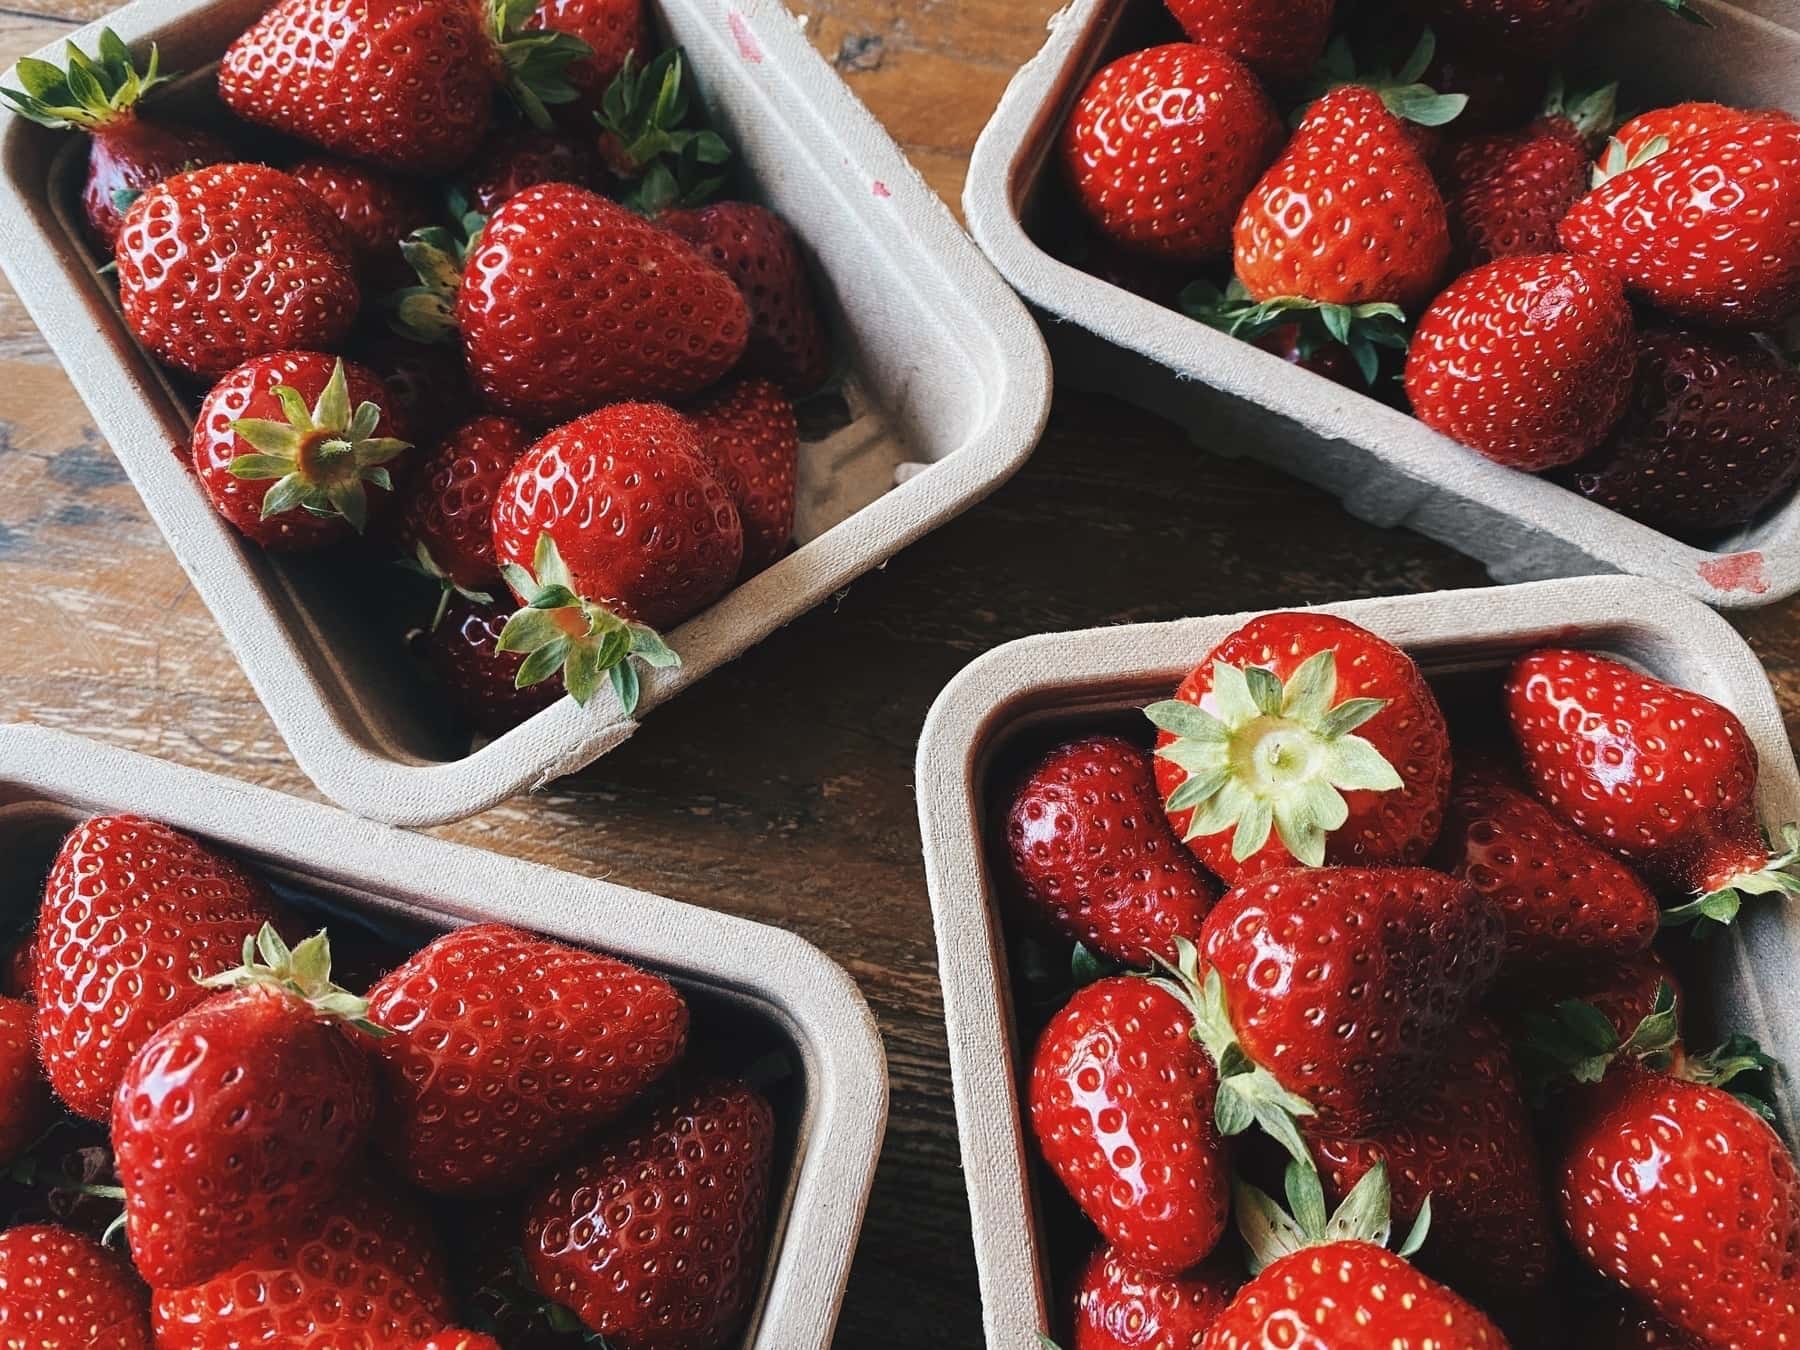 Four cartons filled with delicious-looking strawberries.